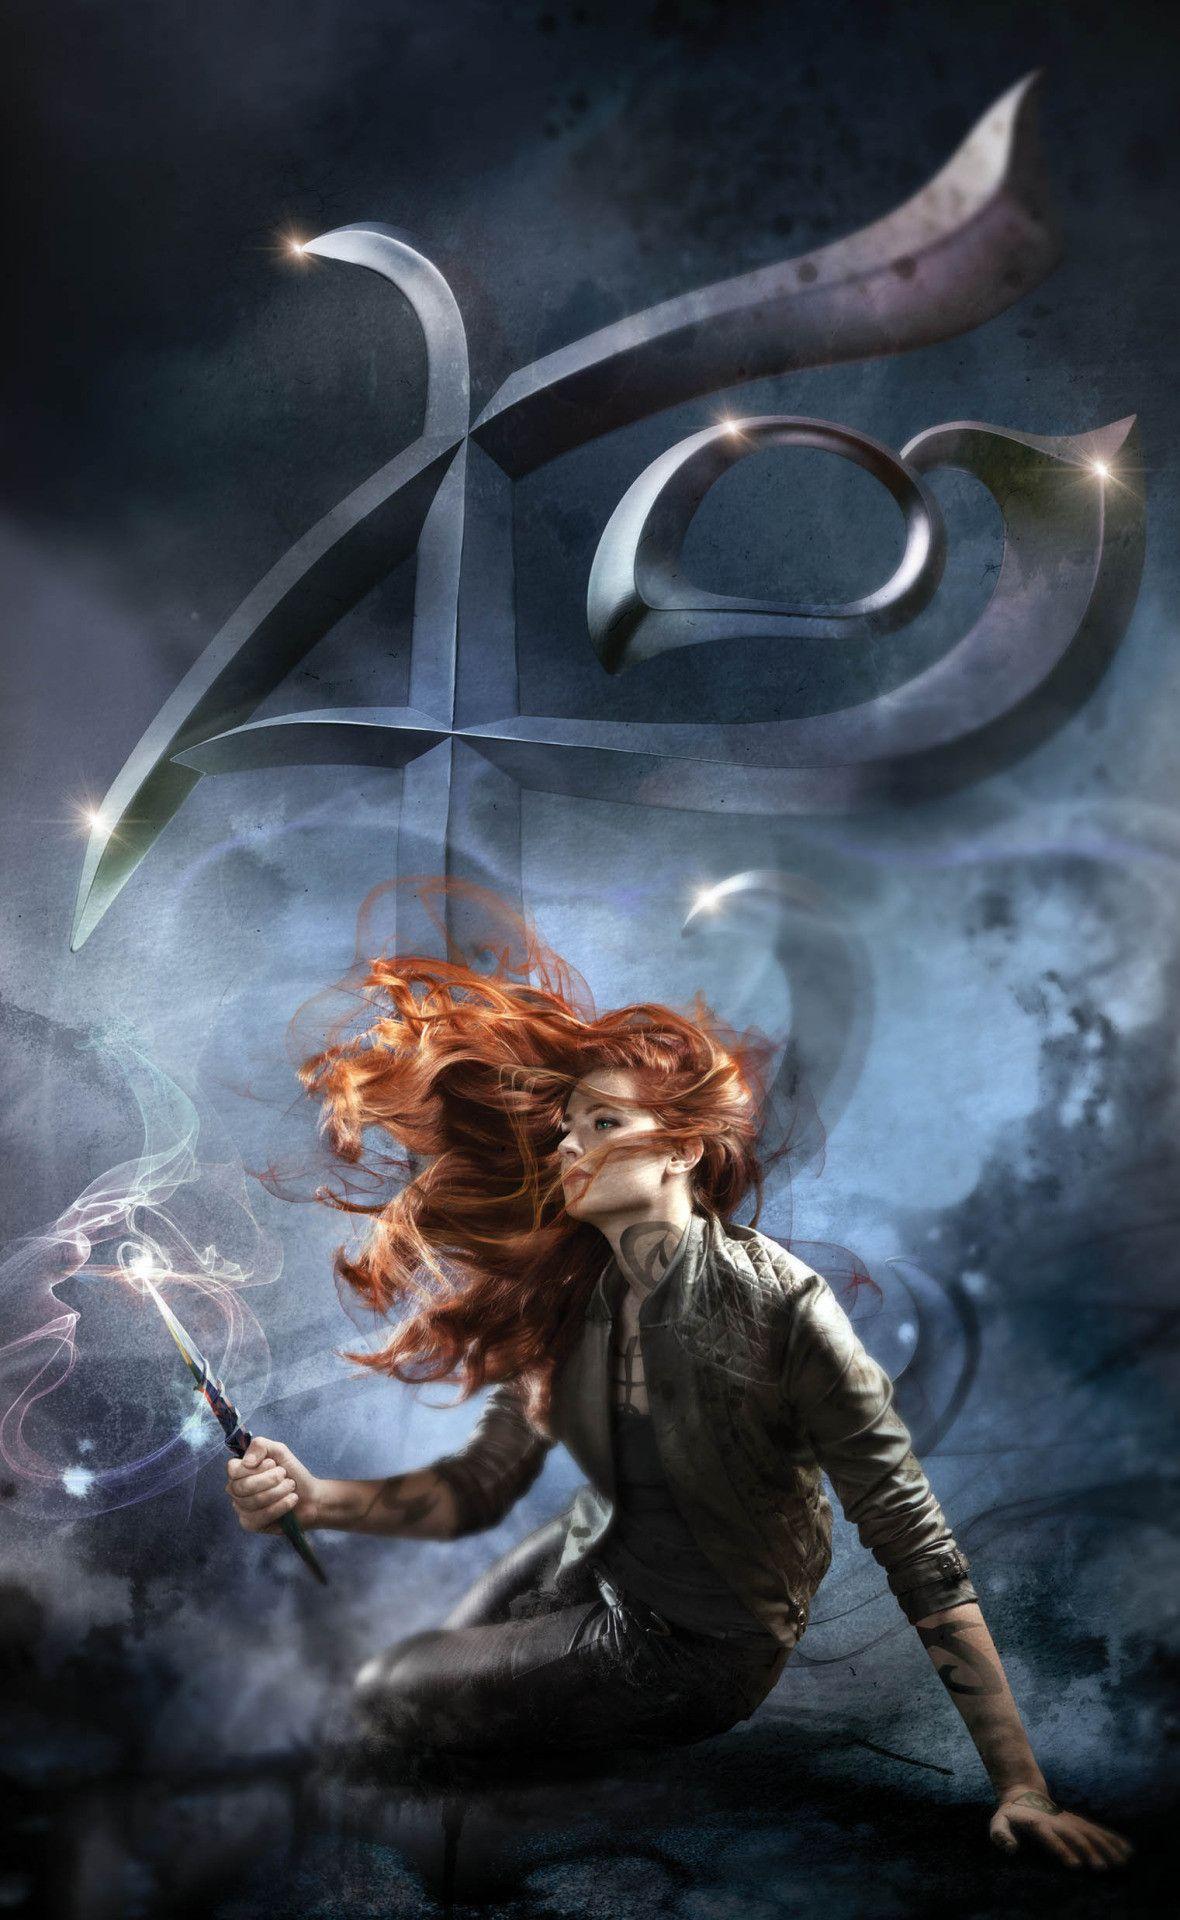 Shadowhunters: The Mortal Instruments Wallpapers - Wallpaper Cave